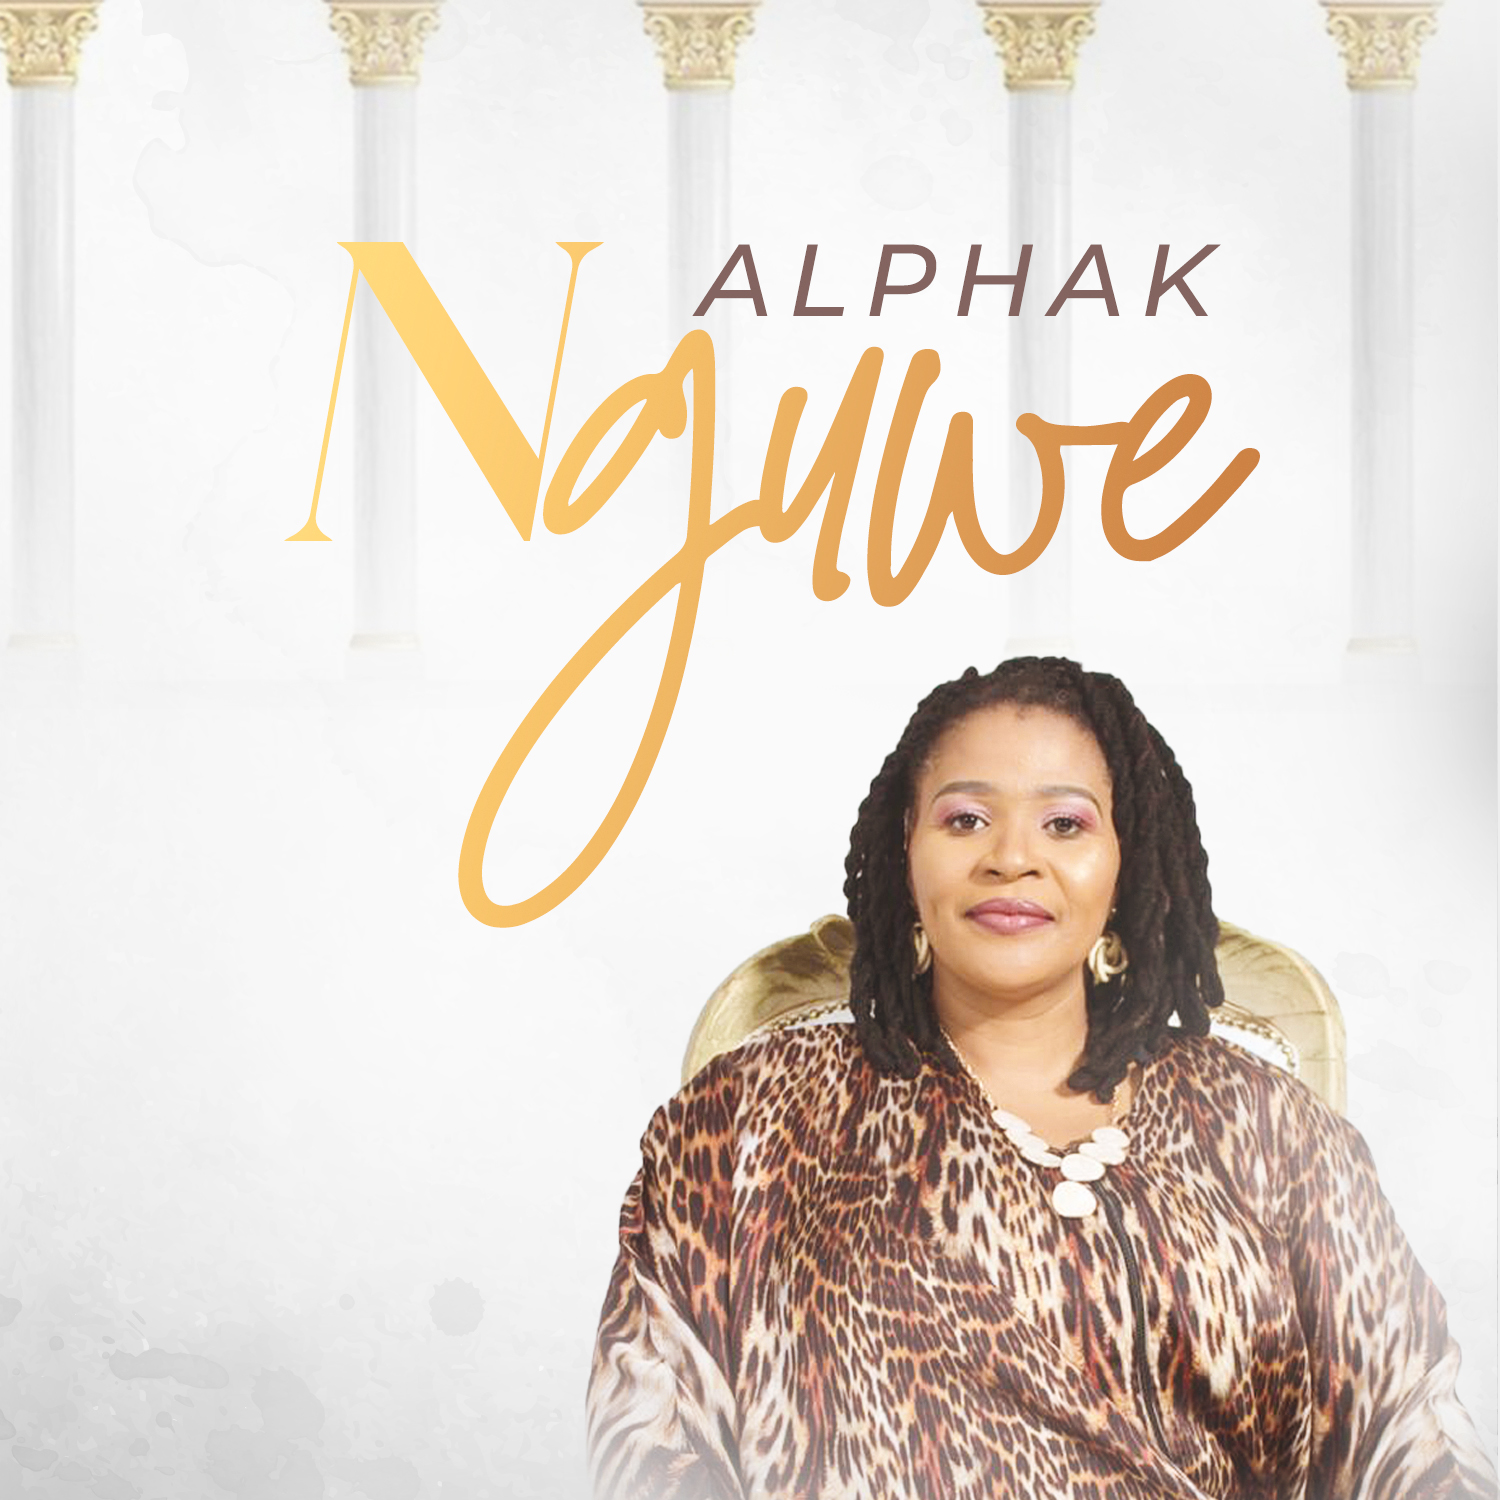 Alpha K inspires us with her brand new single ‘Nguwe’ from her album ‘The Lord Is My Light’ – Now added to the Bafana FM playlist.